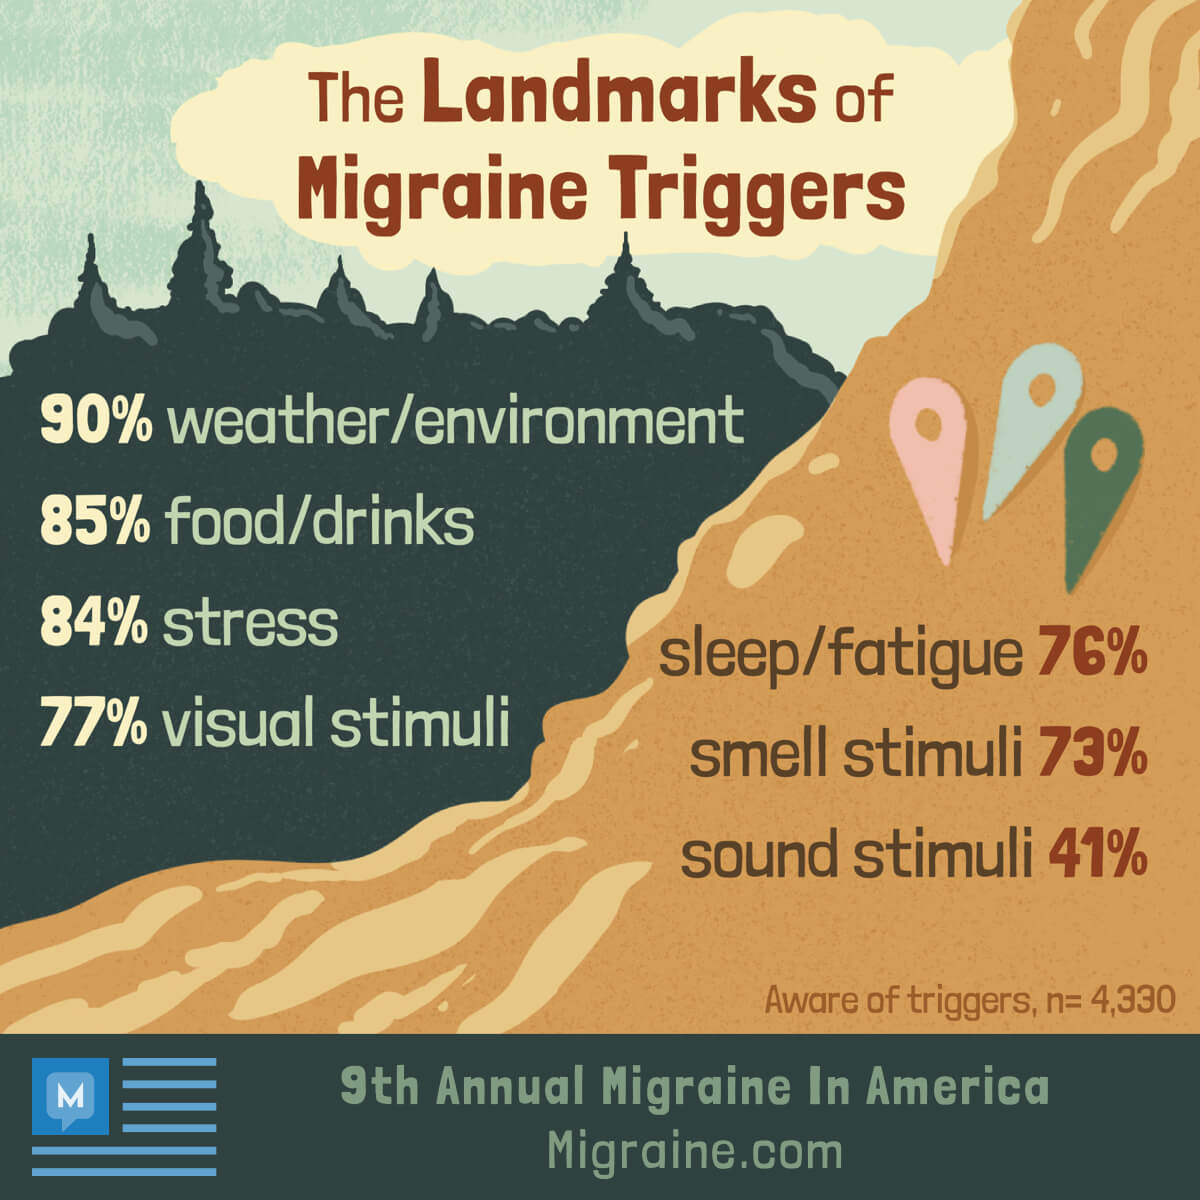 The most common migraine triggers are weather (90%), food (85%), stress (84%), visual stimuli (77%), and more.